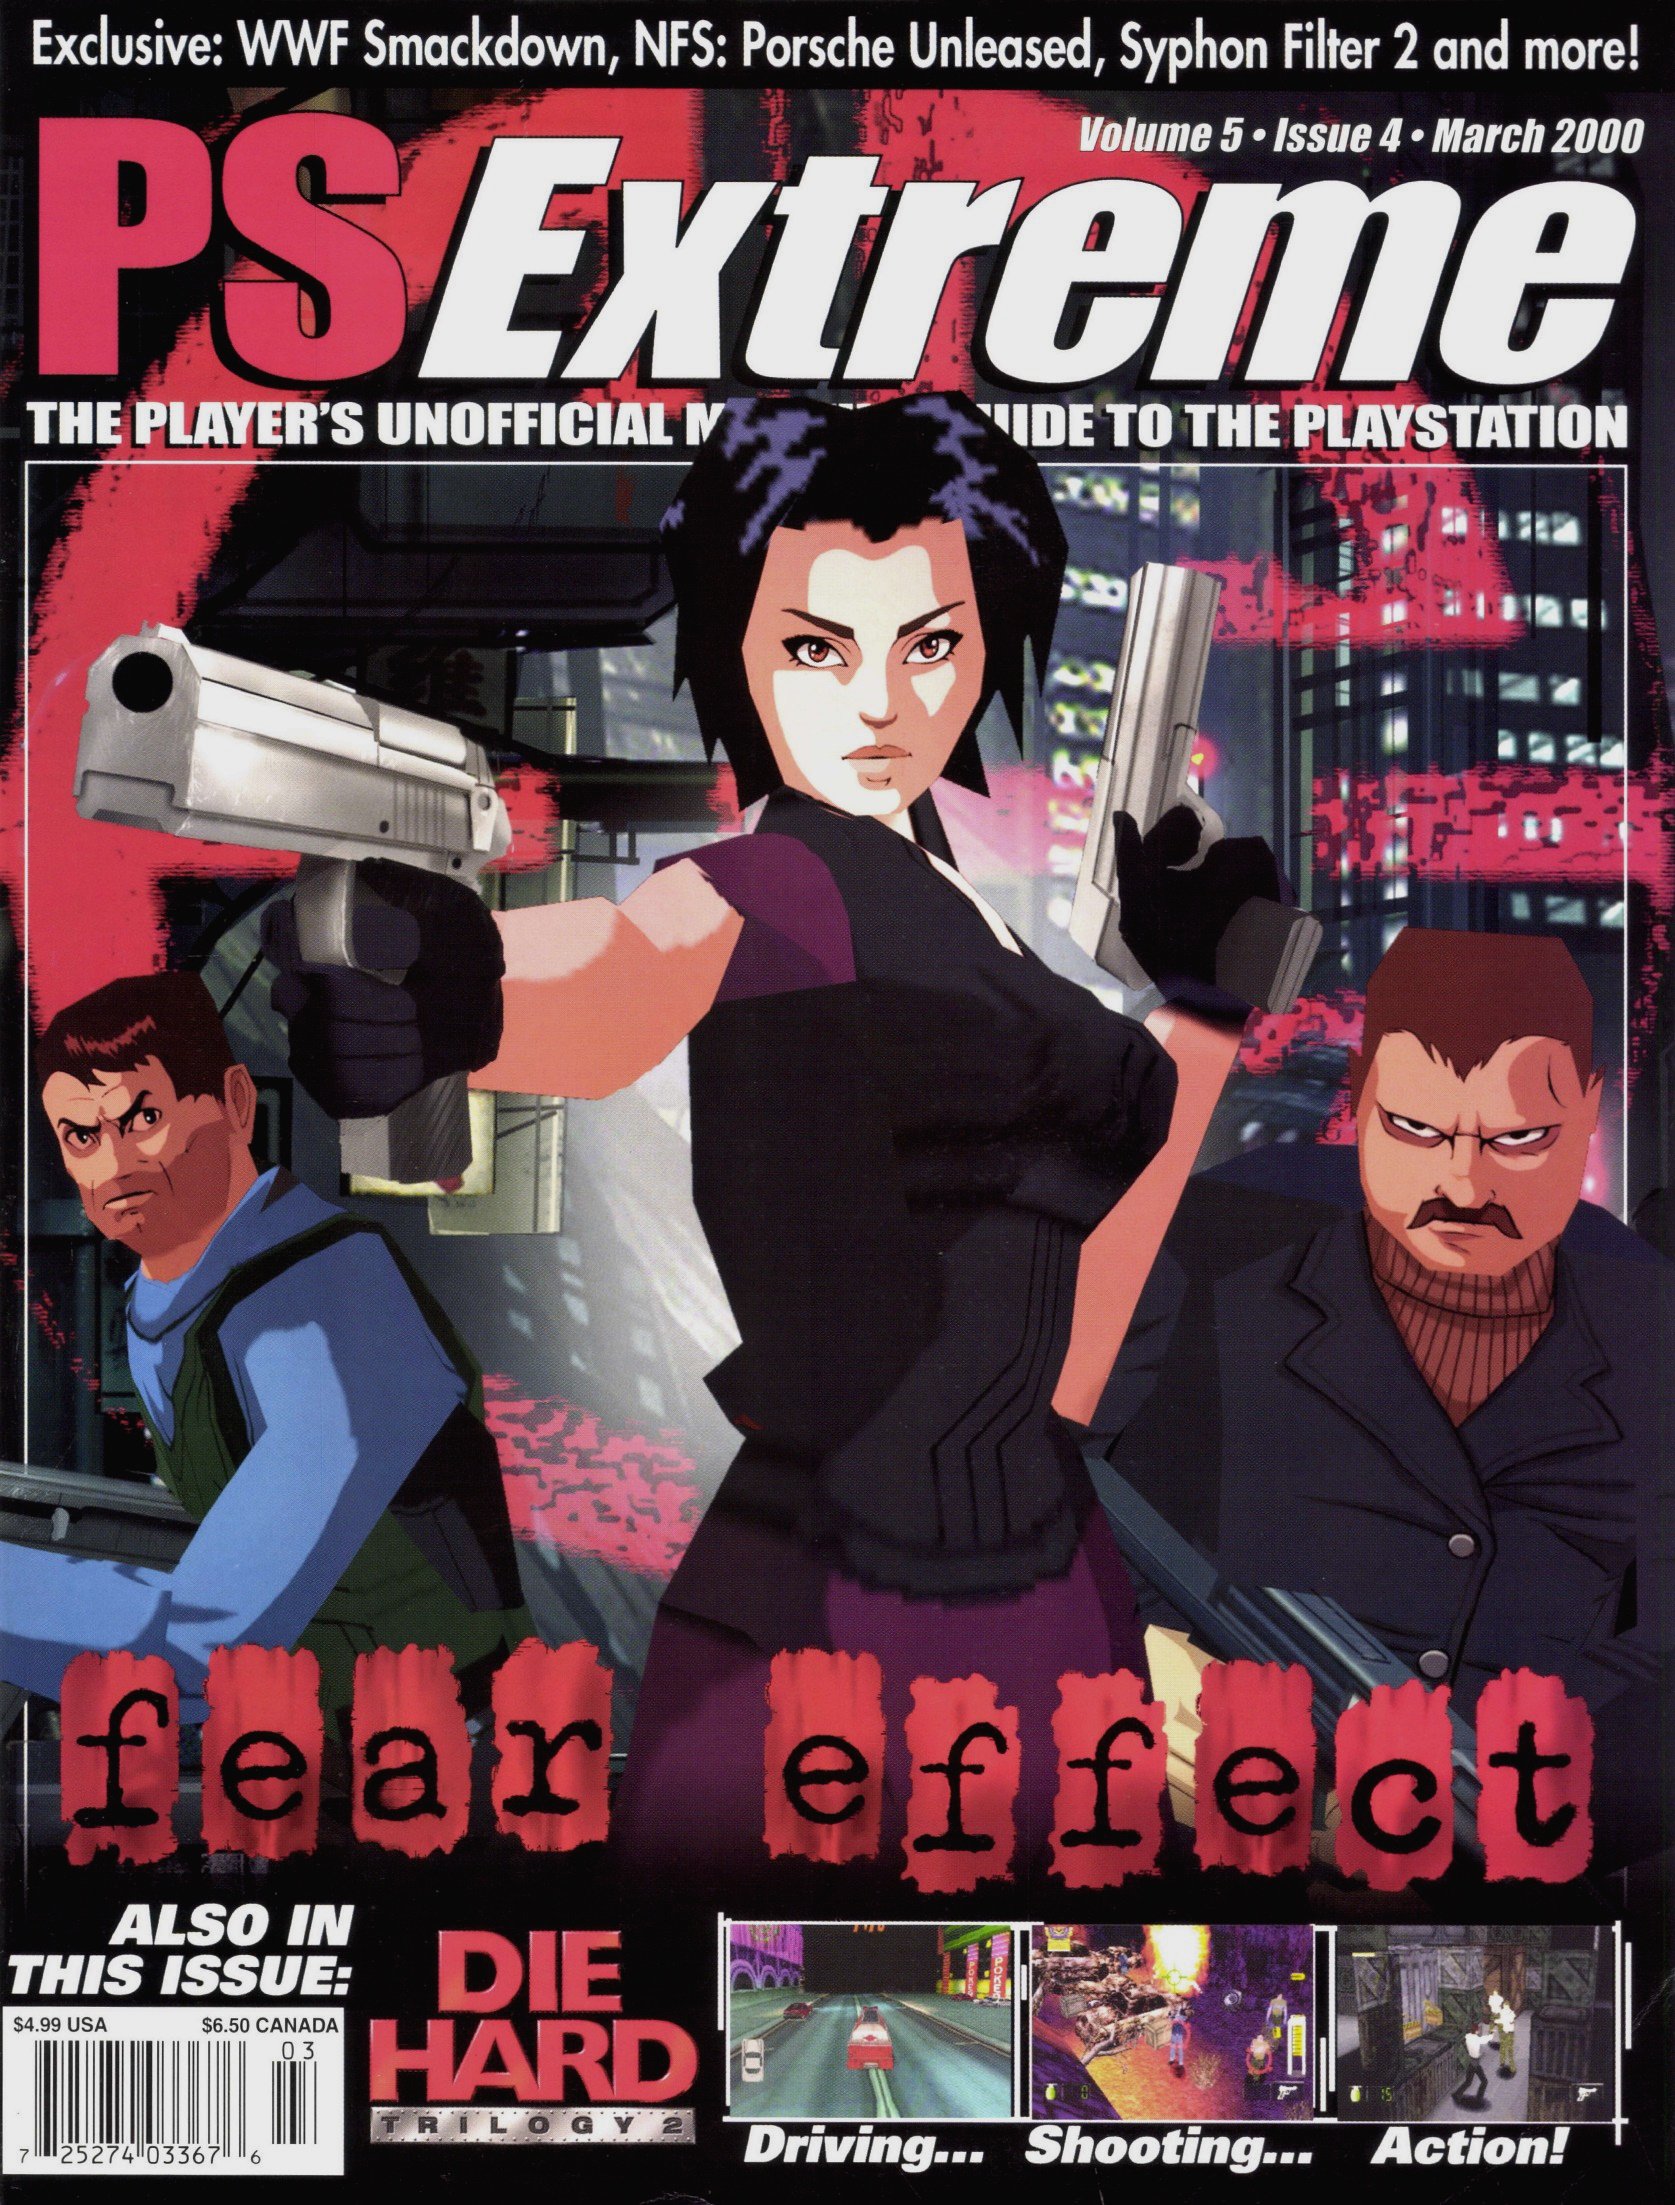 More information about "PSExtreme Issue 52 (March 2000)"